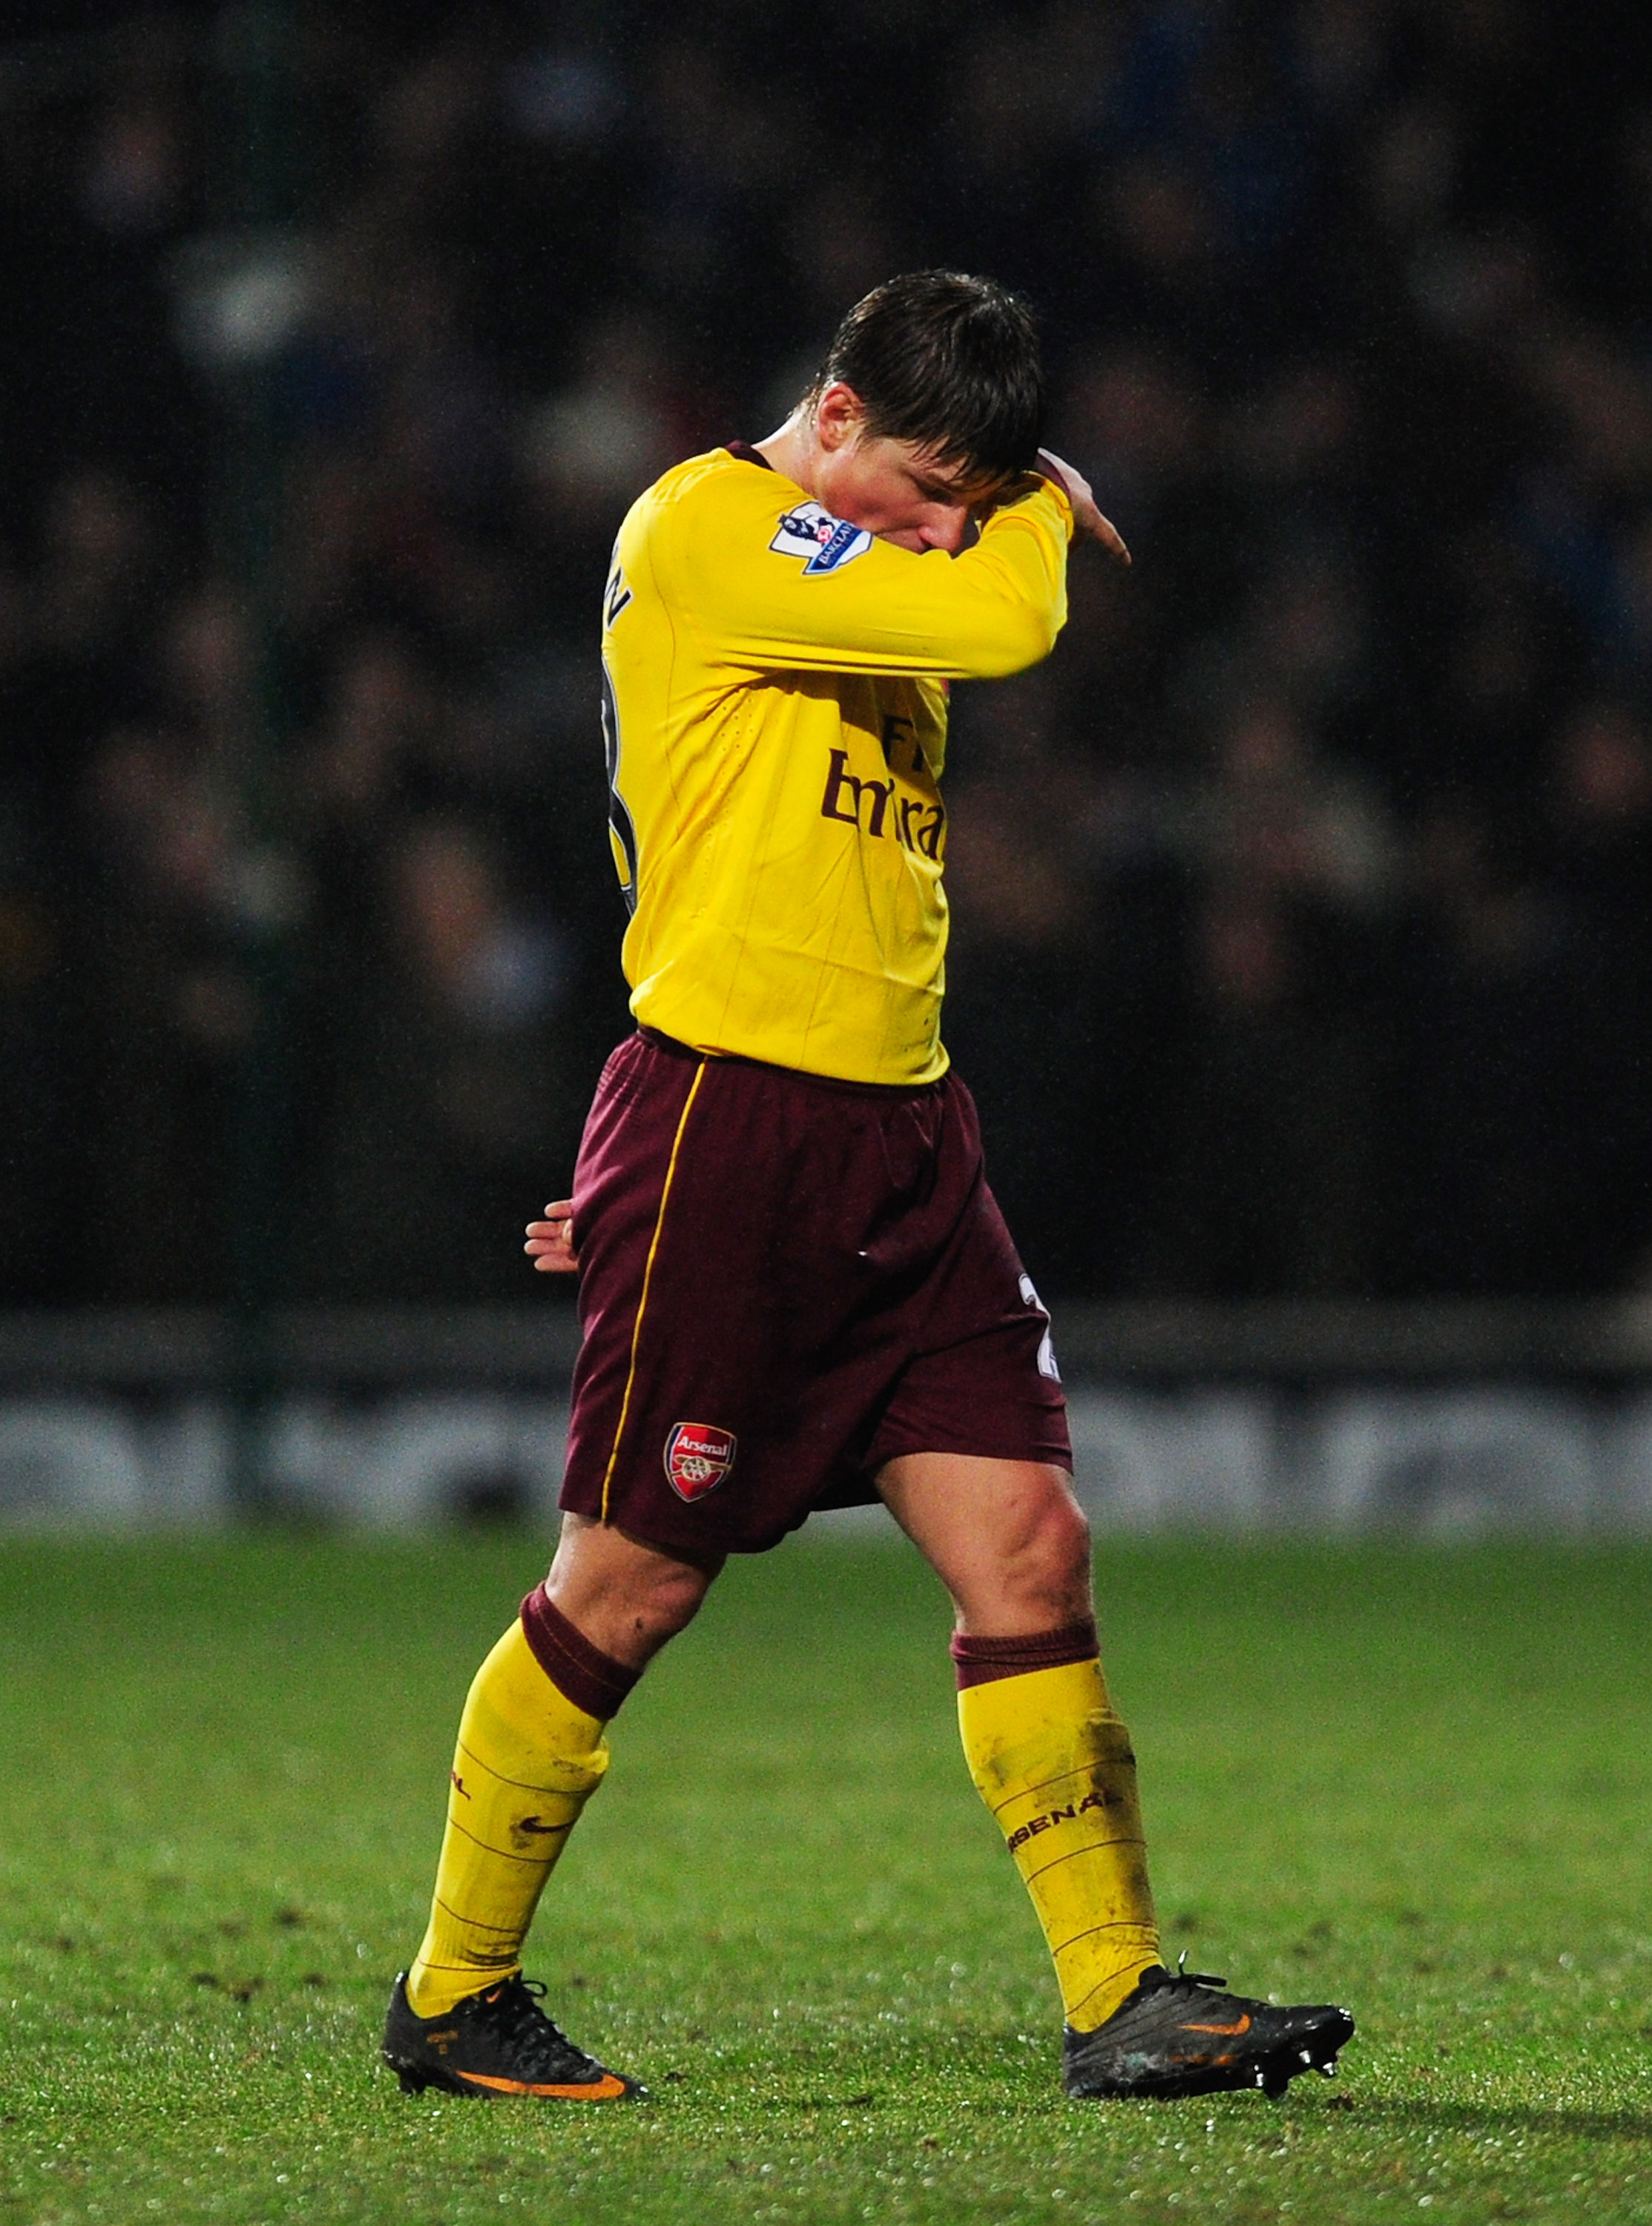 IPSWICH, ENGLAND - JANUARY 12: Andrey Arshavin of Arsenal looks dejected after seeing Tamas Priskin of Ipswich Town open the scoring during the Carling Cup Semi Final First Leg match between Ipswich Town and Arsenal at Portman Road on January 12, 2011 in 